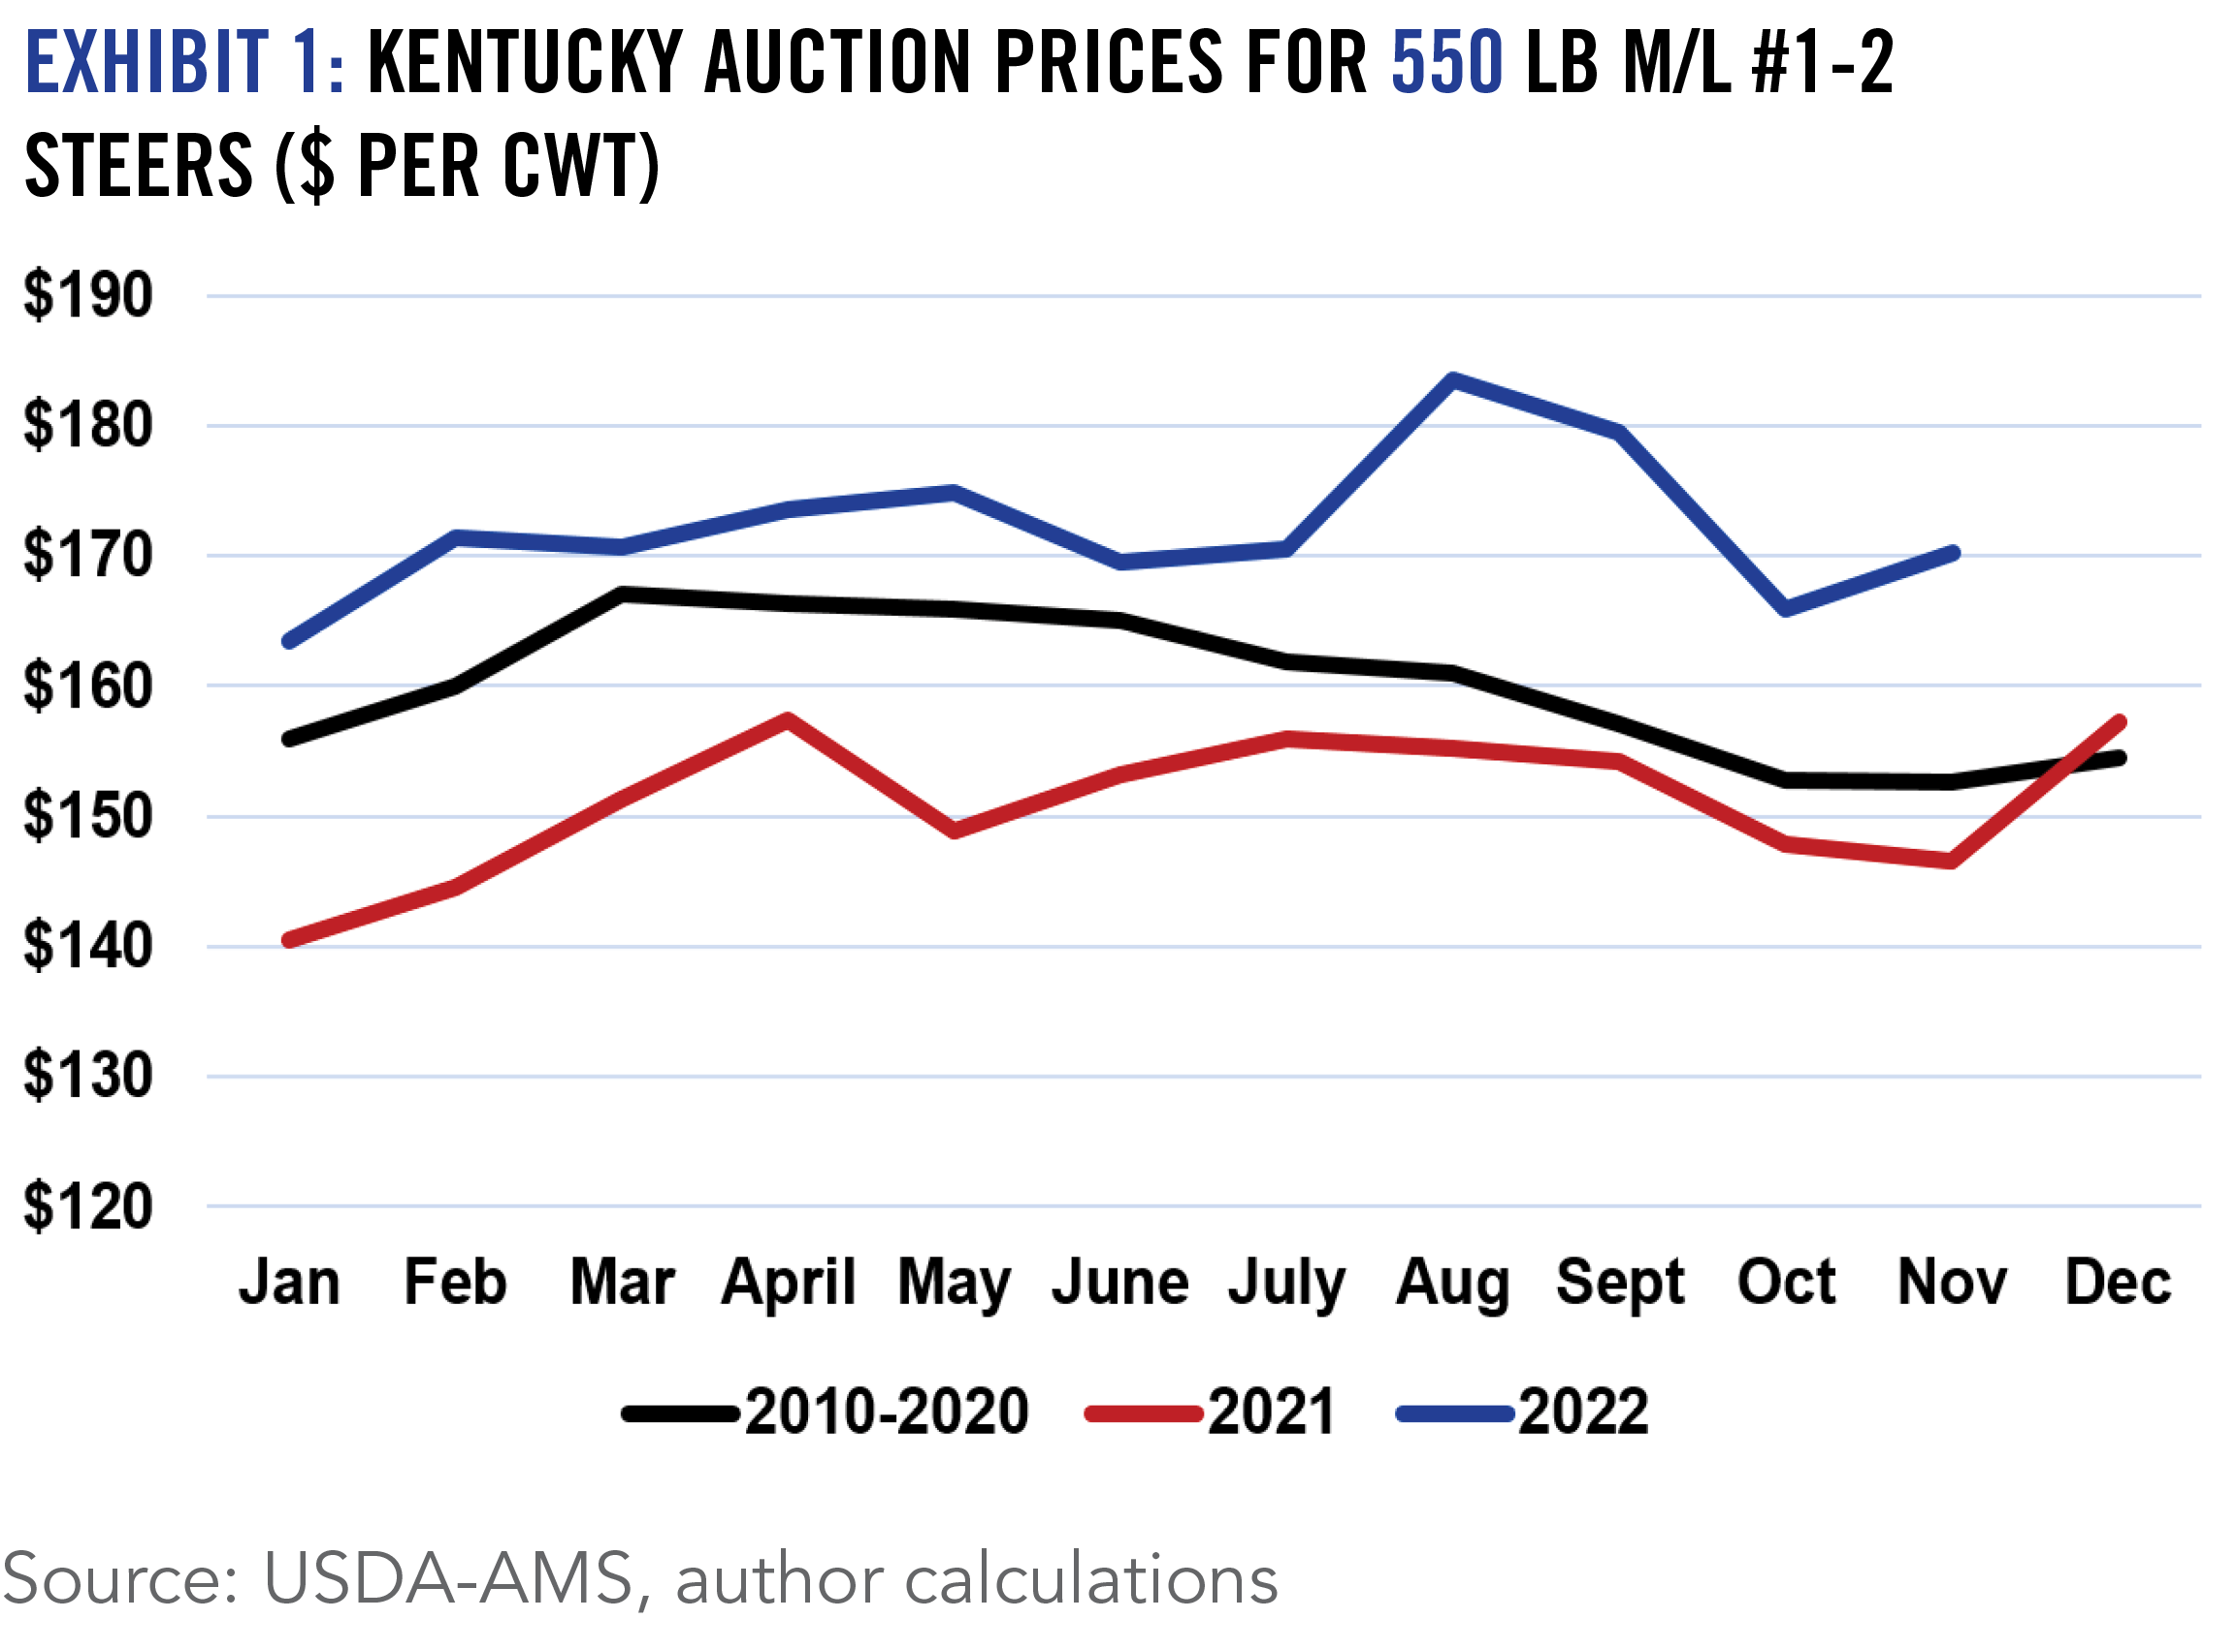 EXHIBIT 1: KENTUCKY AUCTION PRICES FOR 550 LB M/L #1-2 STEERS ($ PER CWT)